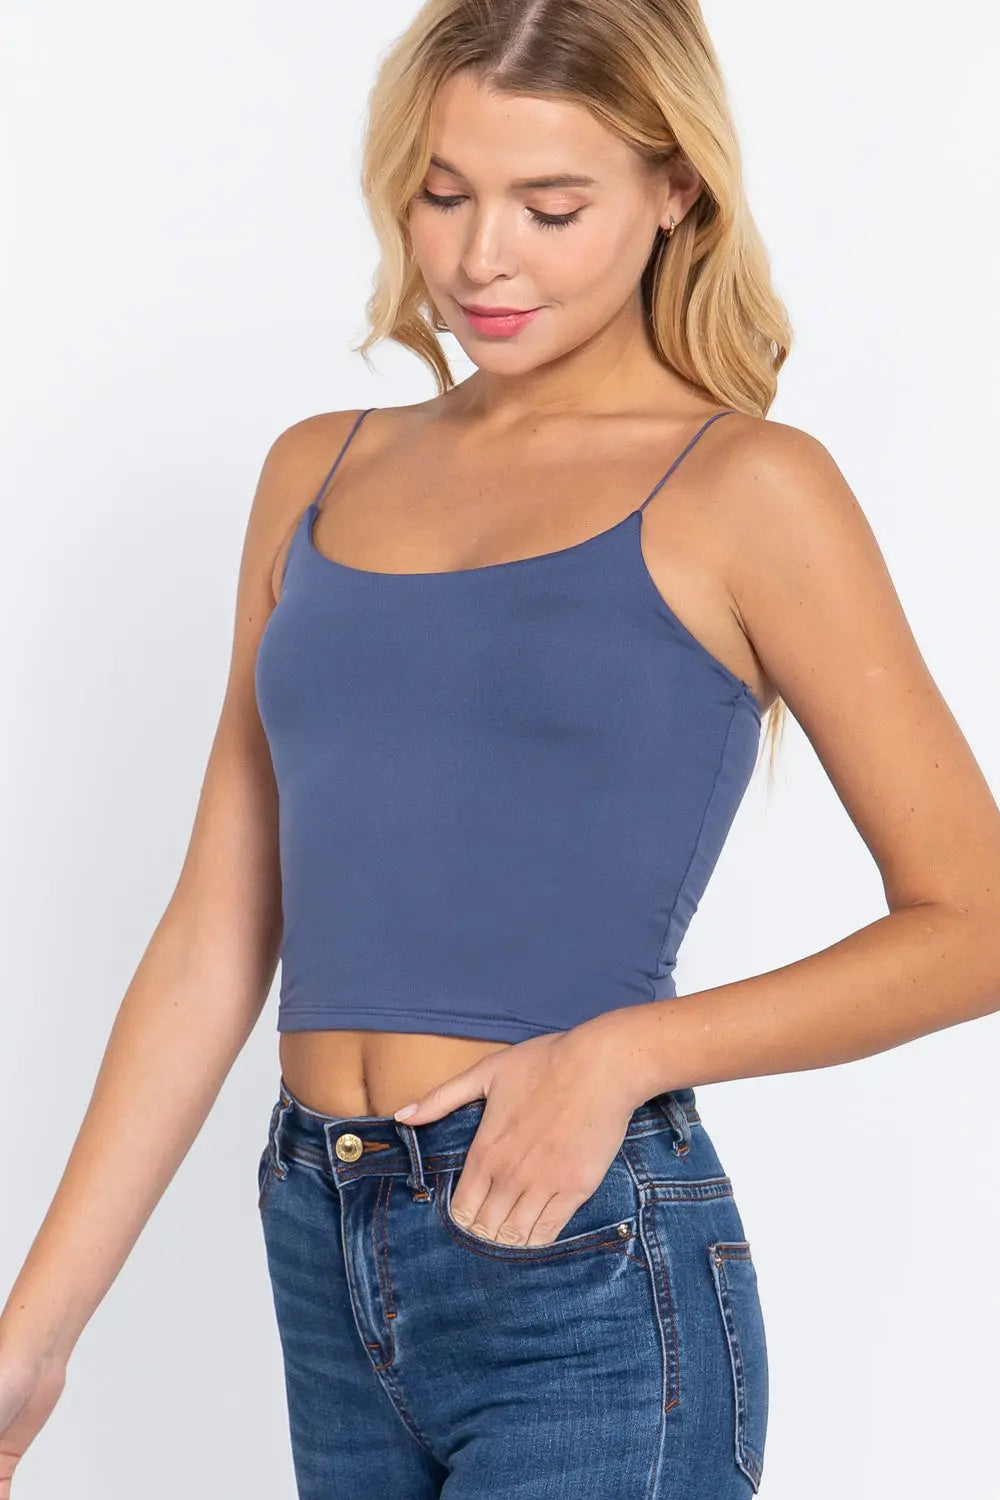 Elastic Strap Two Ply Dty Brushed Knit Cami Top Sunny EvE Fashion